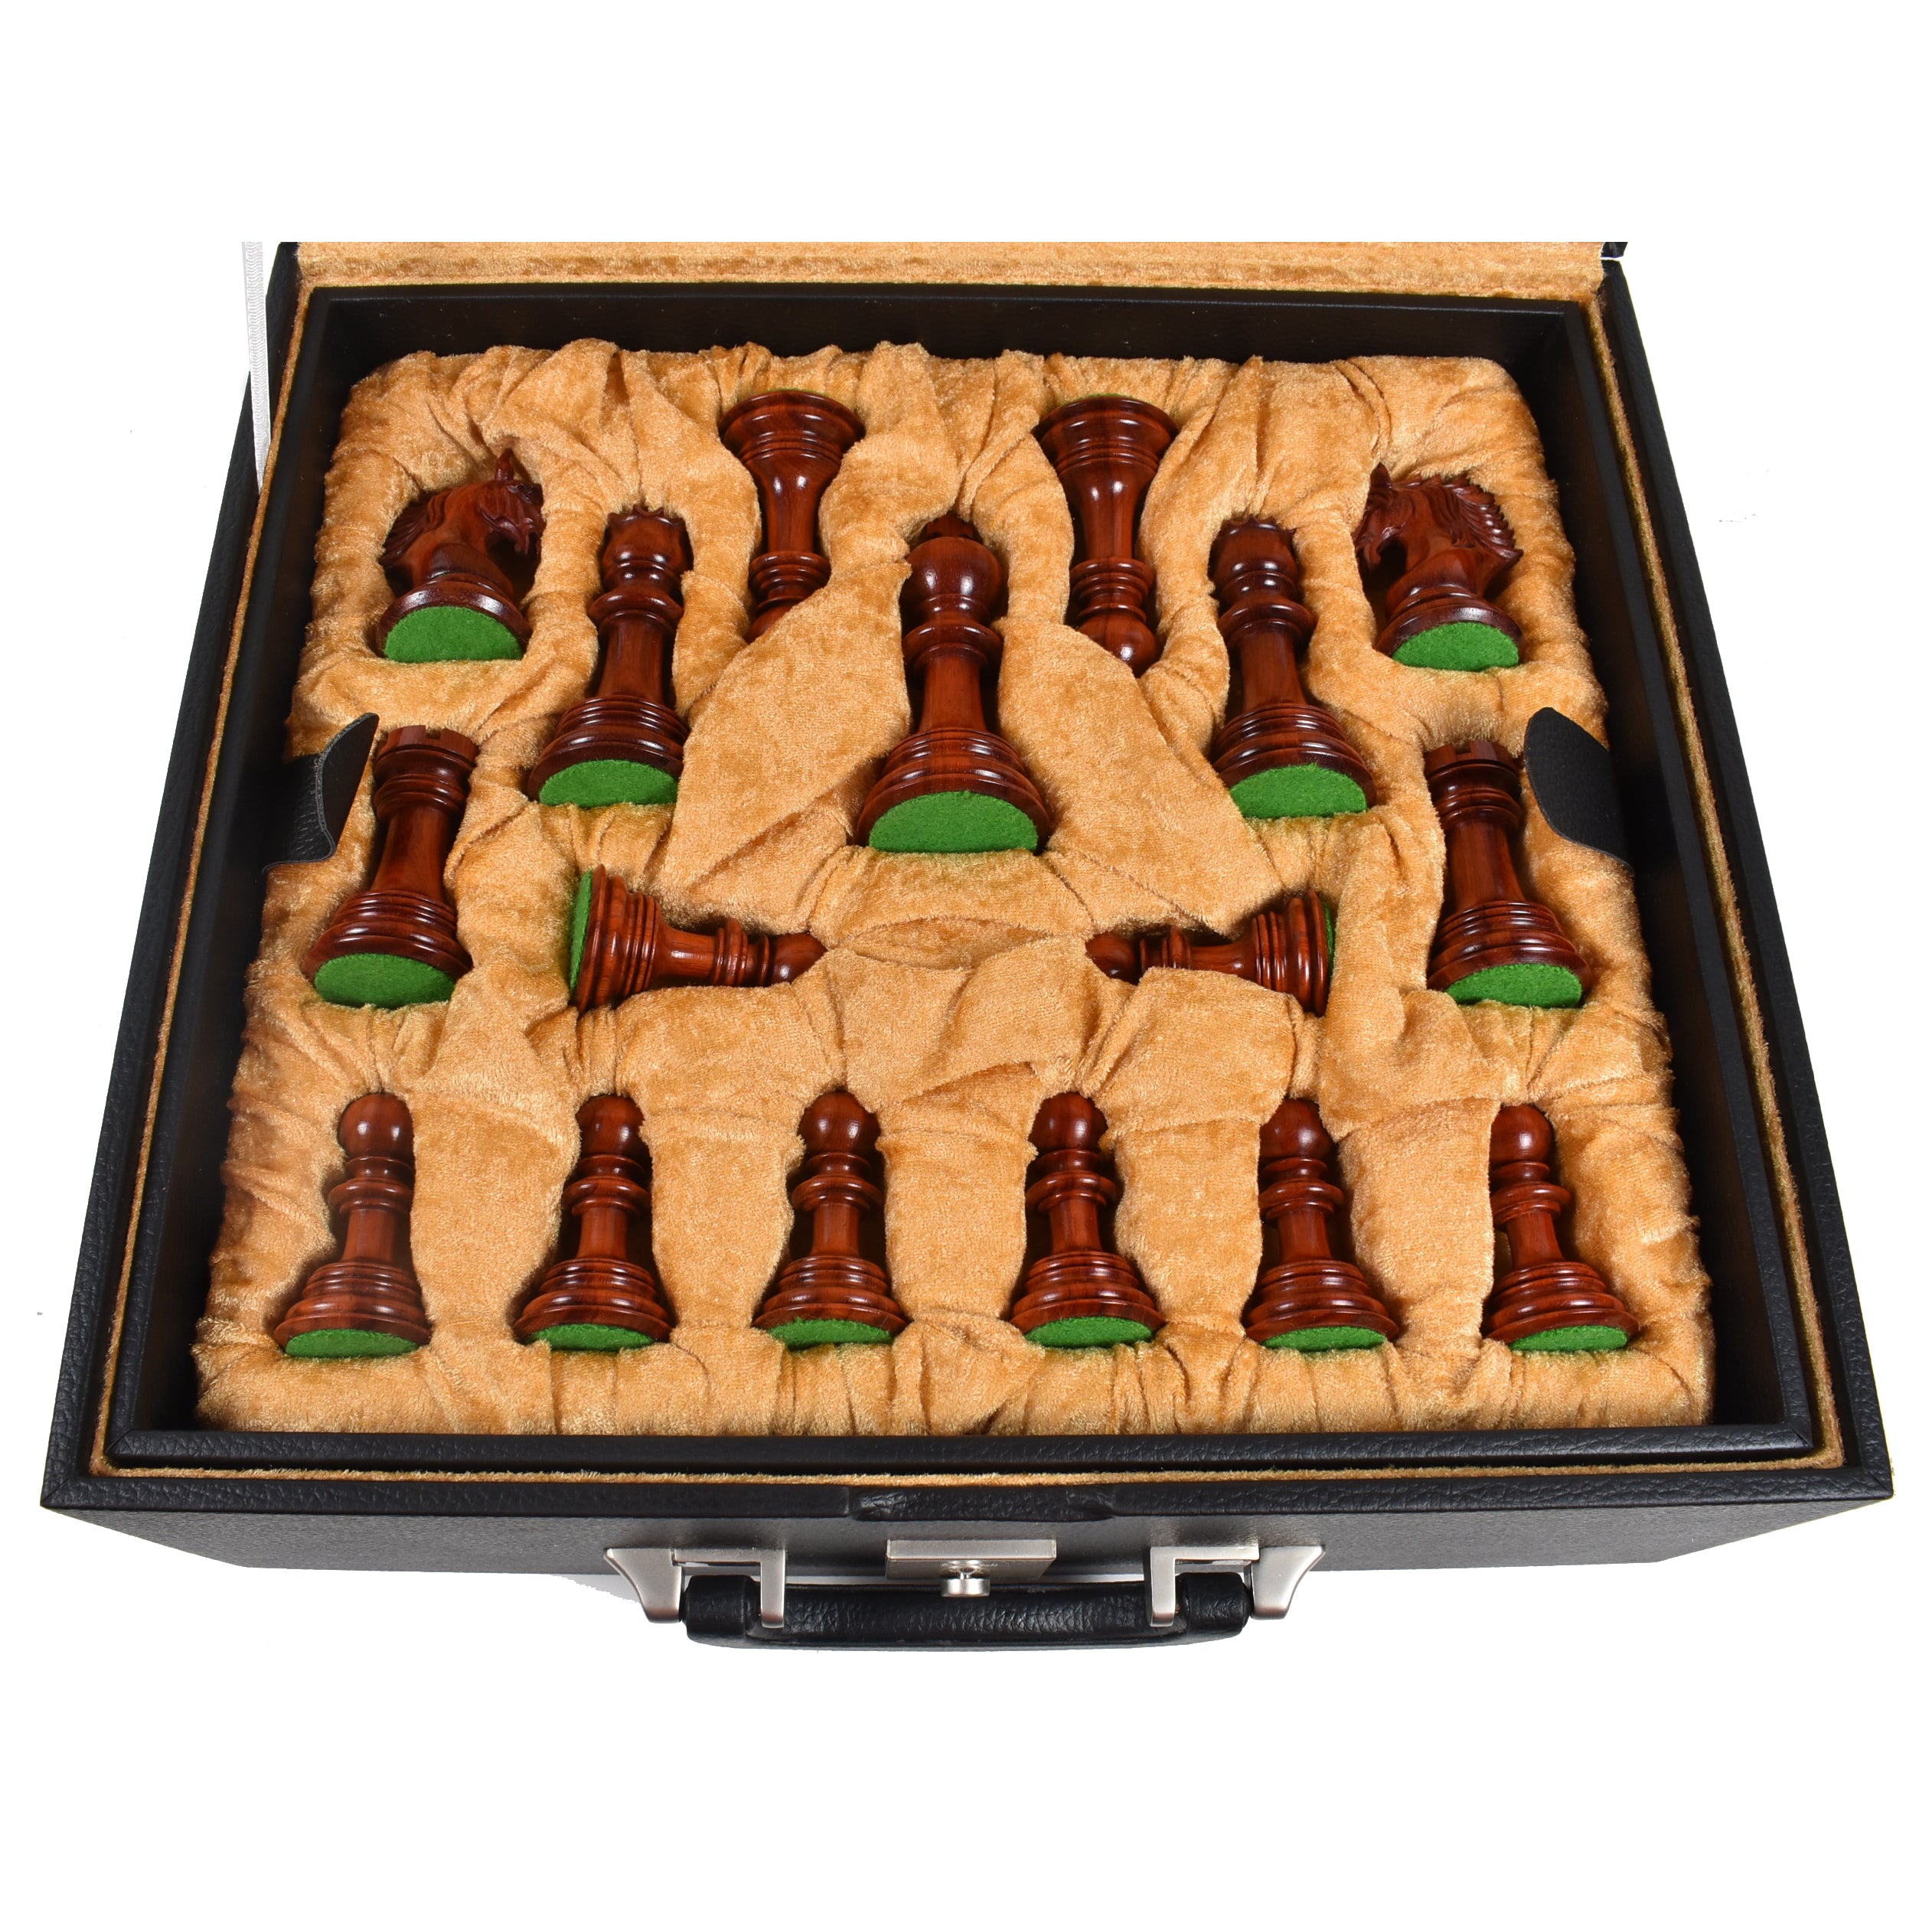 Combo of Mogul Staunton Lacquered Chess Pieces with 23" Large Ebony & Maple Wood Chessboard and Storage Box